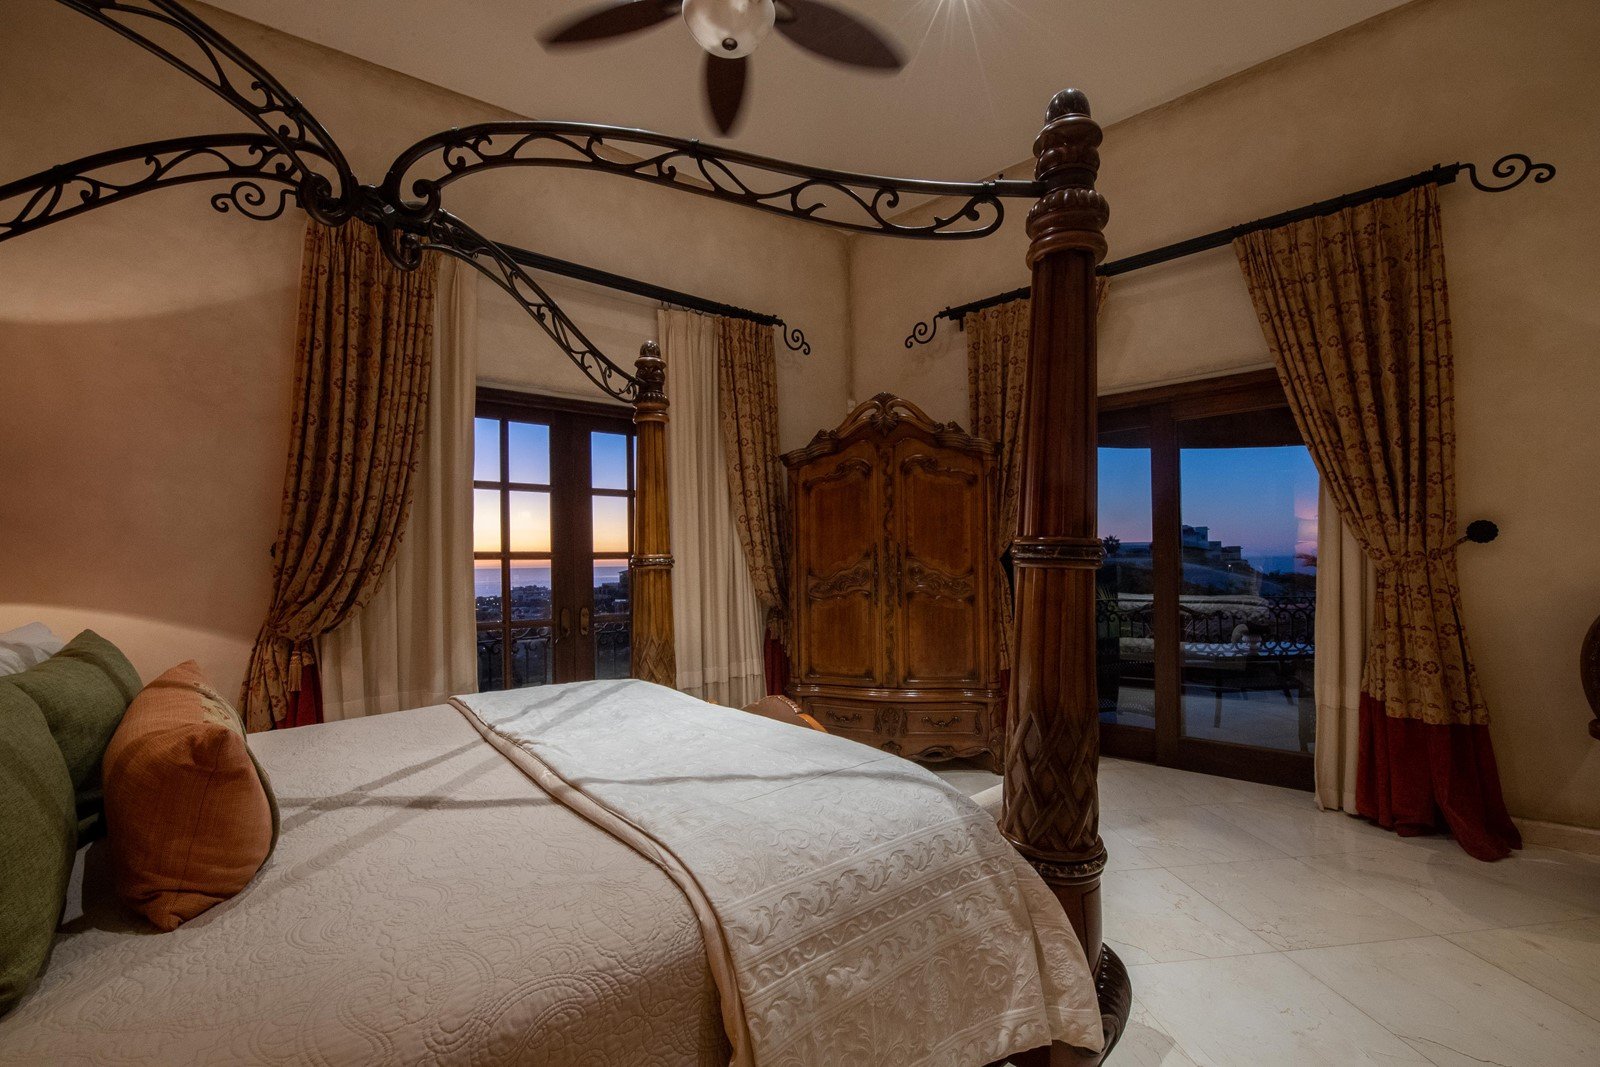 A bedroom with two balcony doors and views of the ocean.